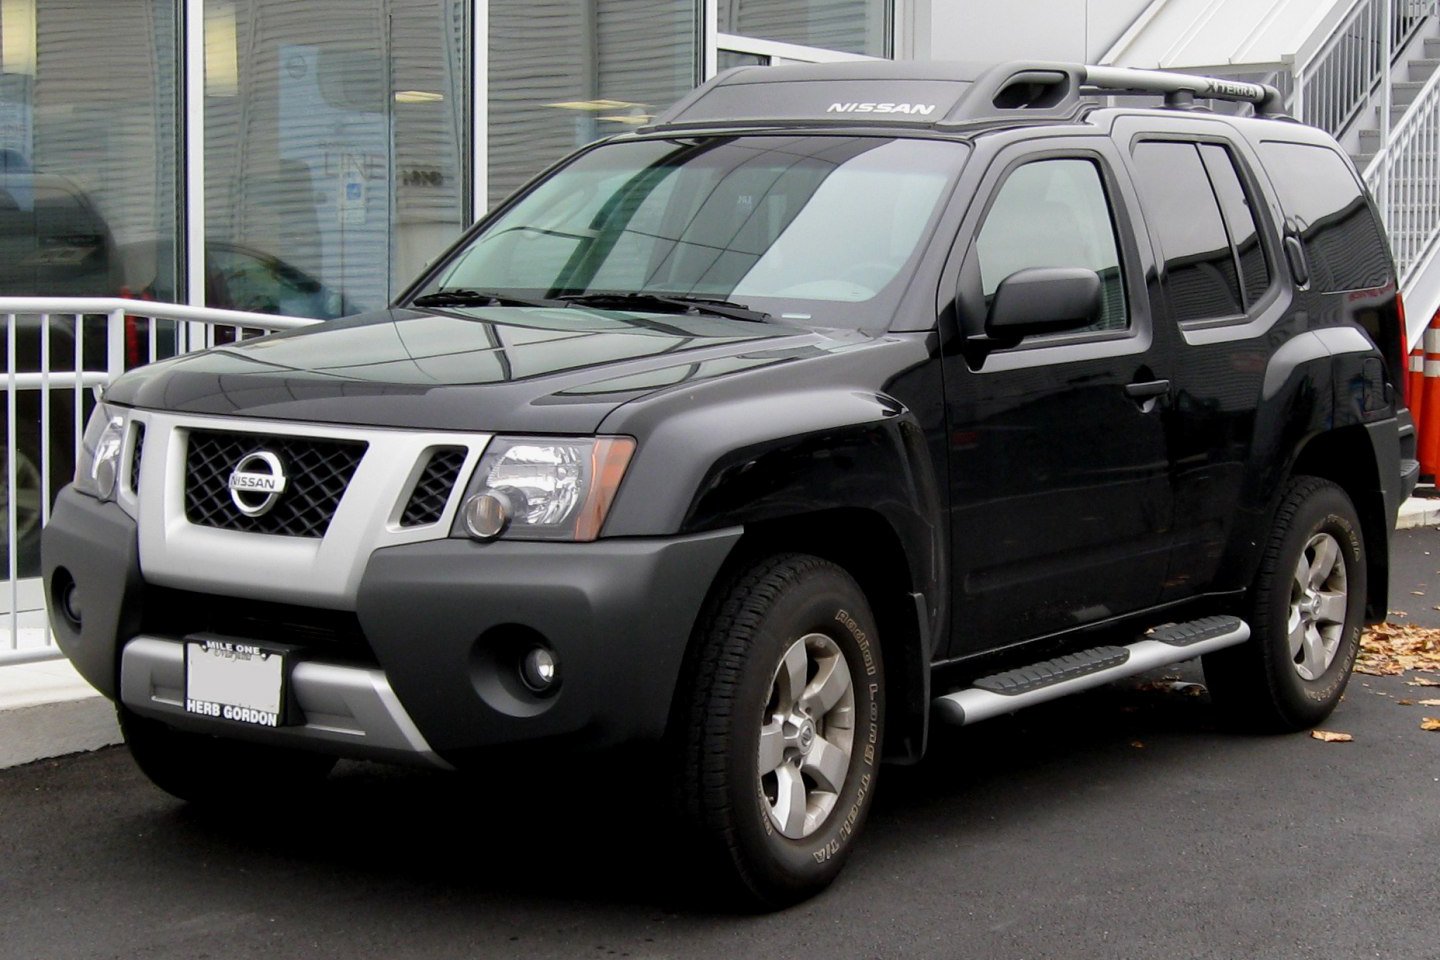 Nissan Xterra technical specifications and fuel economy nissan xterra fuel economy l/100km